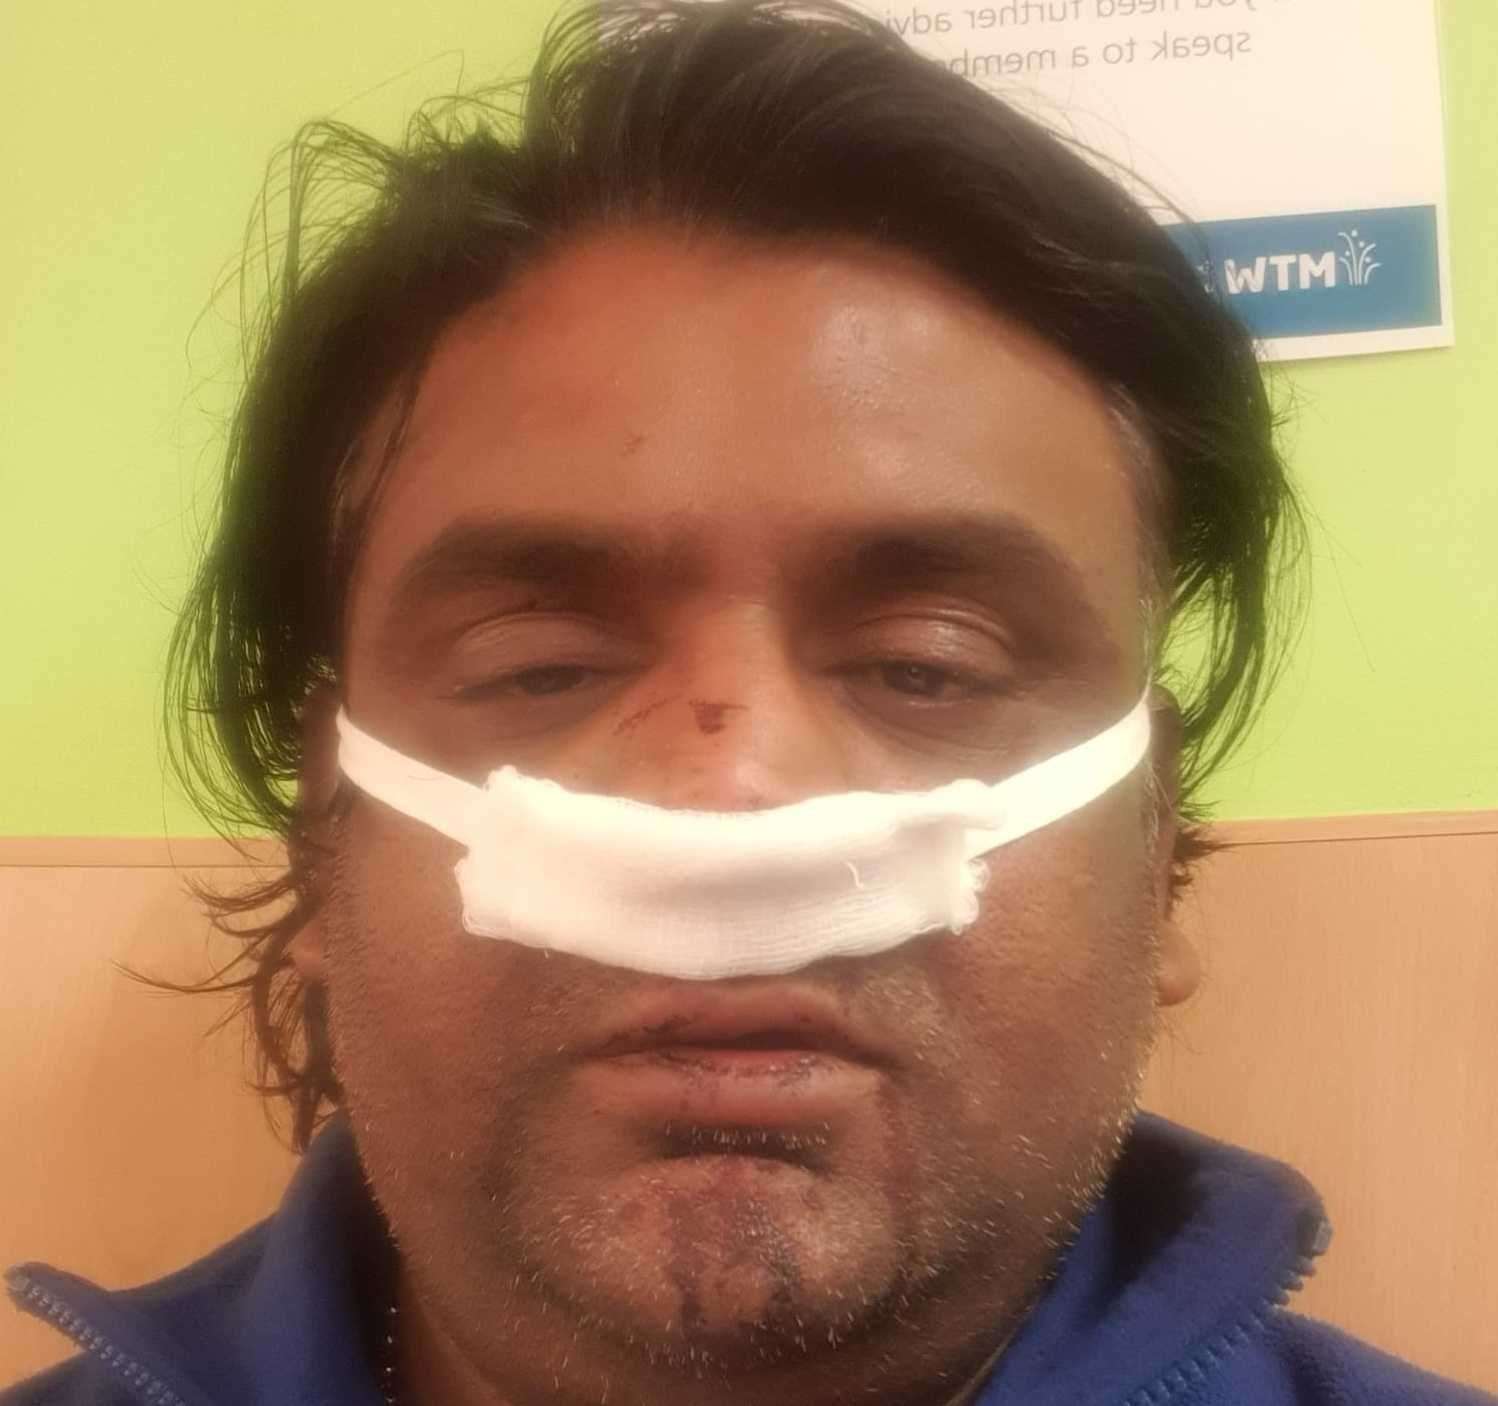 The 49-year-old had to go to hospital with a broken nose. Picture: Umesh Patel